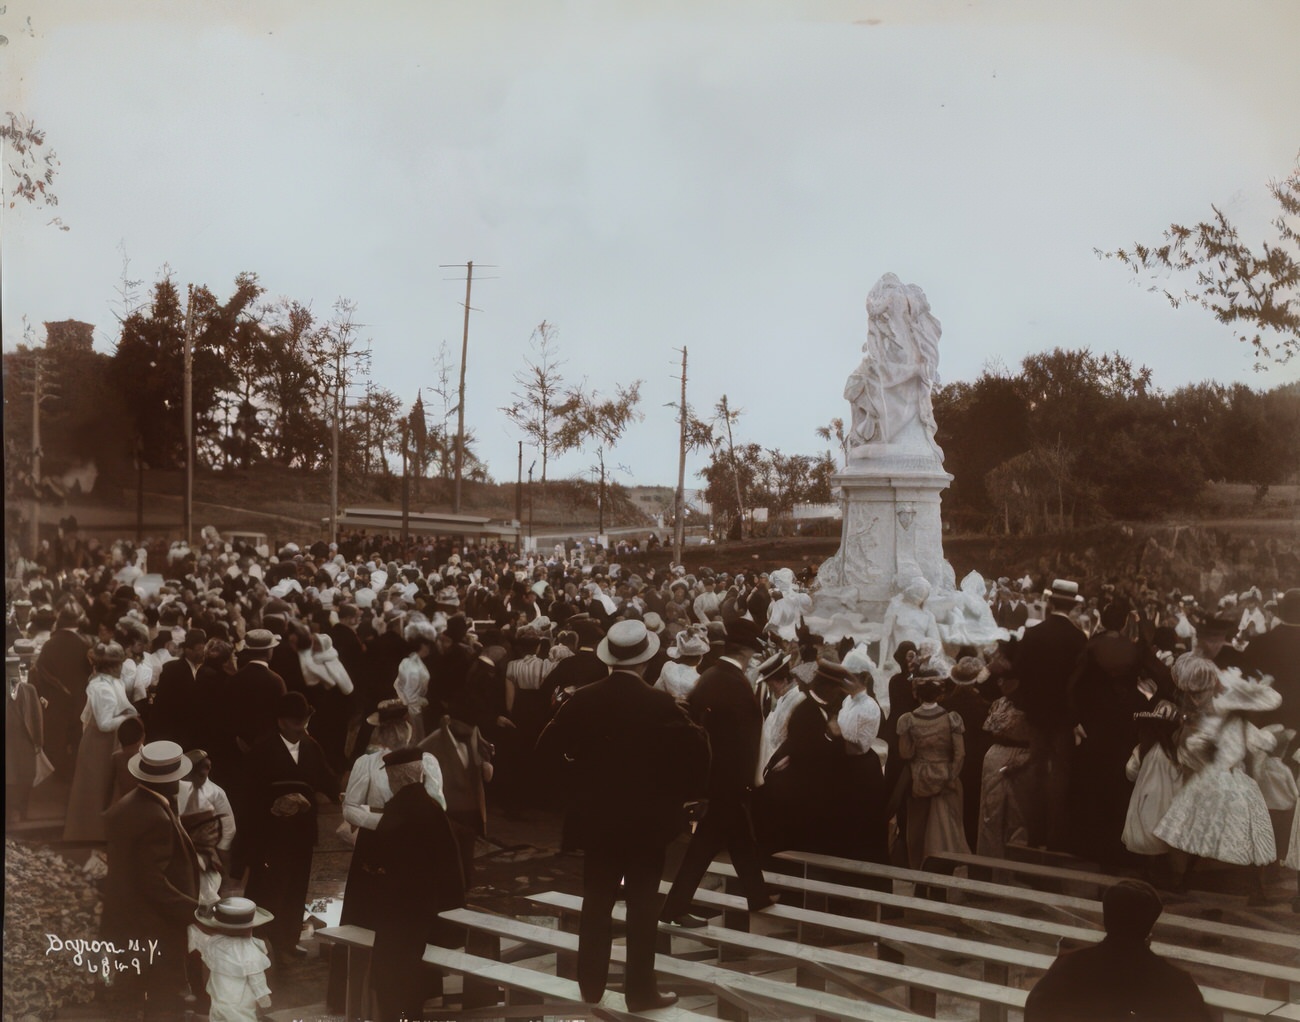 Heinrich Heine Monument Unveiled At Grand Concourse And 164Th Street, Bronx, 1899.